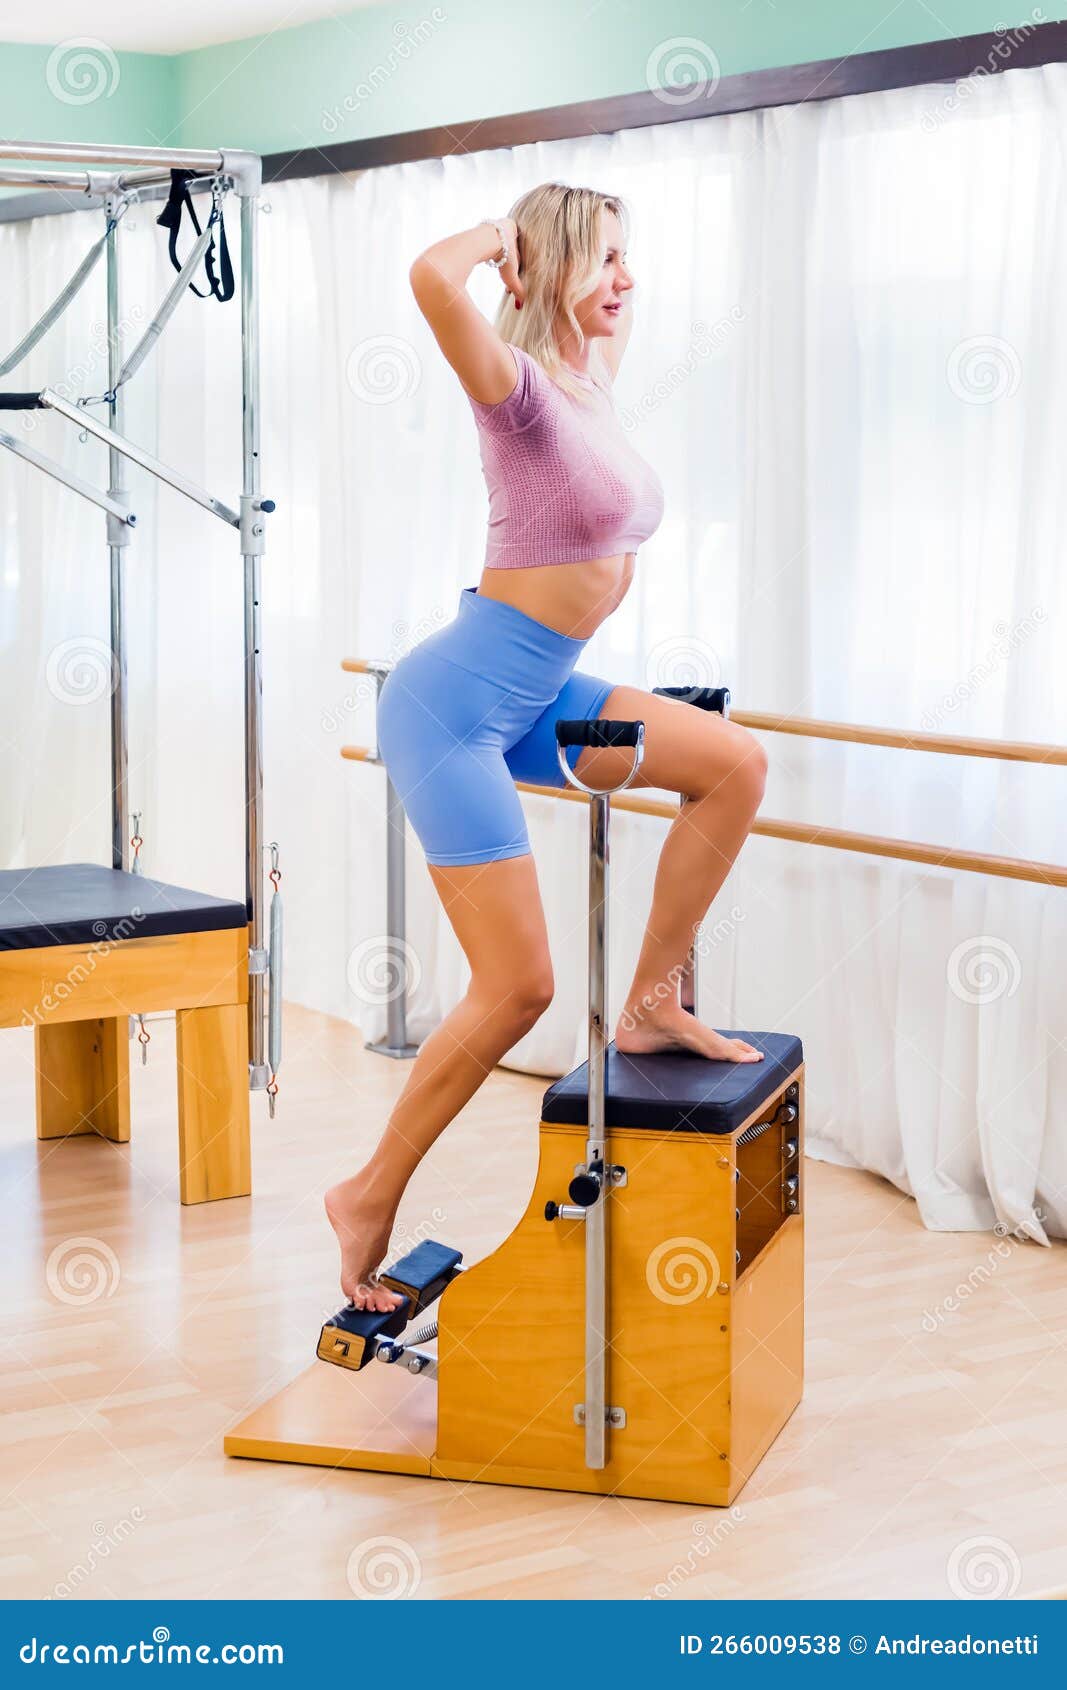 Fit Woman Exercising on Pilates Wunda Chair Stock Photo - Image of  recovery, energy: 266009538